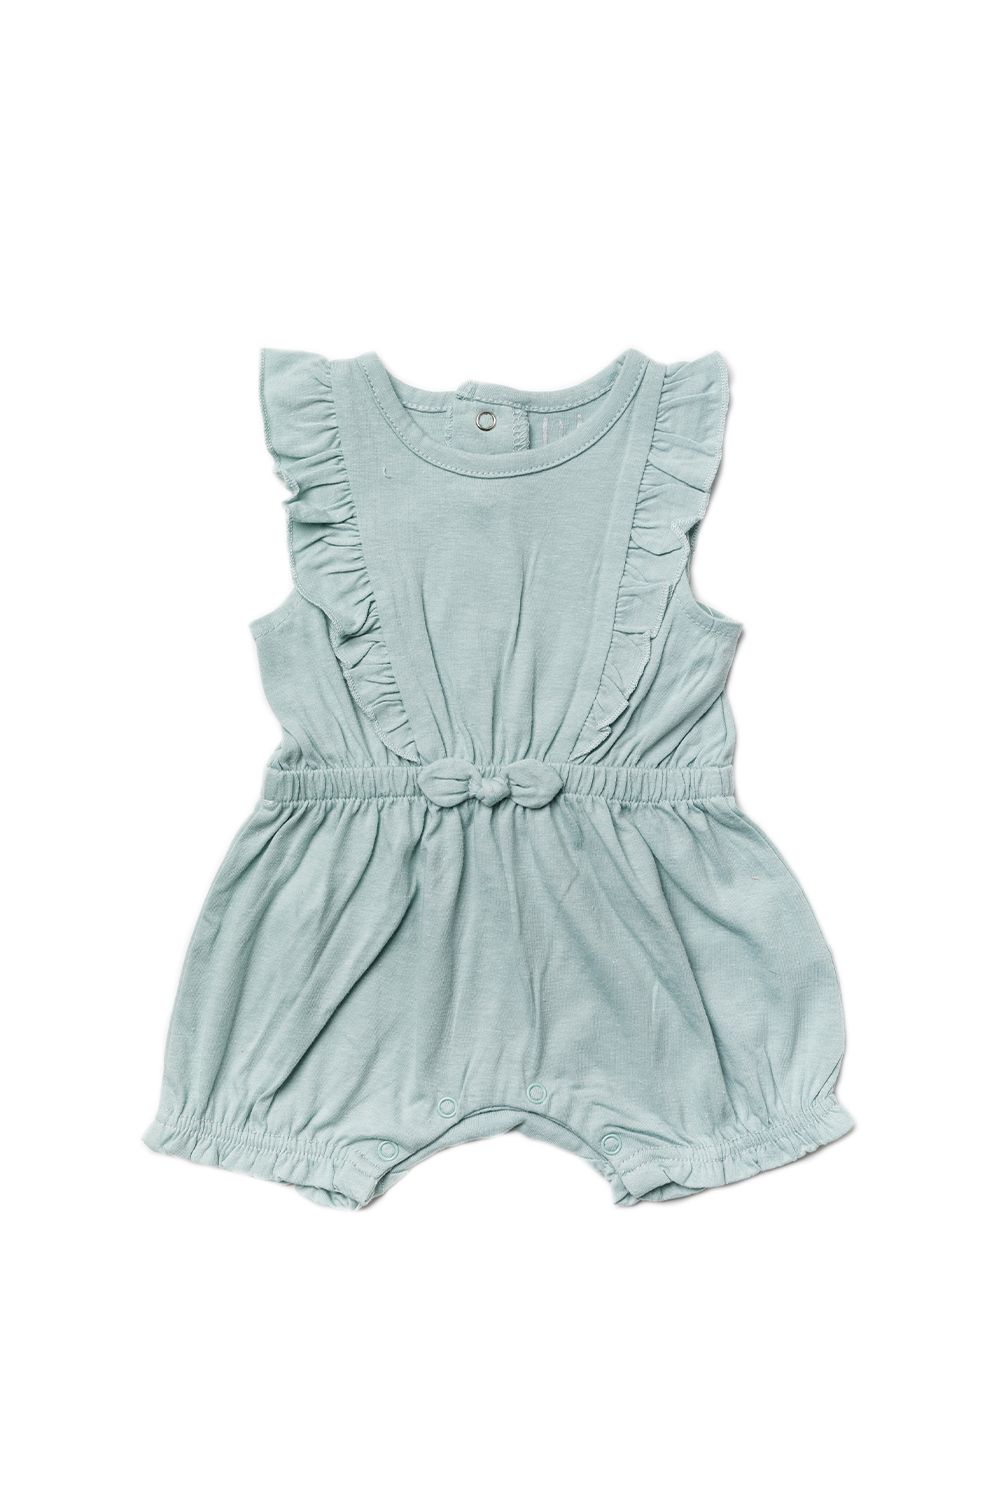 This Miss playsuit is a lovely, simple yet playful style. The arms and legs both have frill detailing and a little bow on the waistband. The playsuit is cotton and has popper fastenings, keeping your little one comfortable. The Miss line captures a playful and pretty style for your little one’s wardrobe, This piece would also make a lovely summer gift.